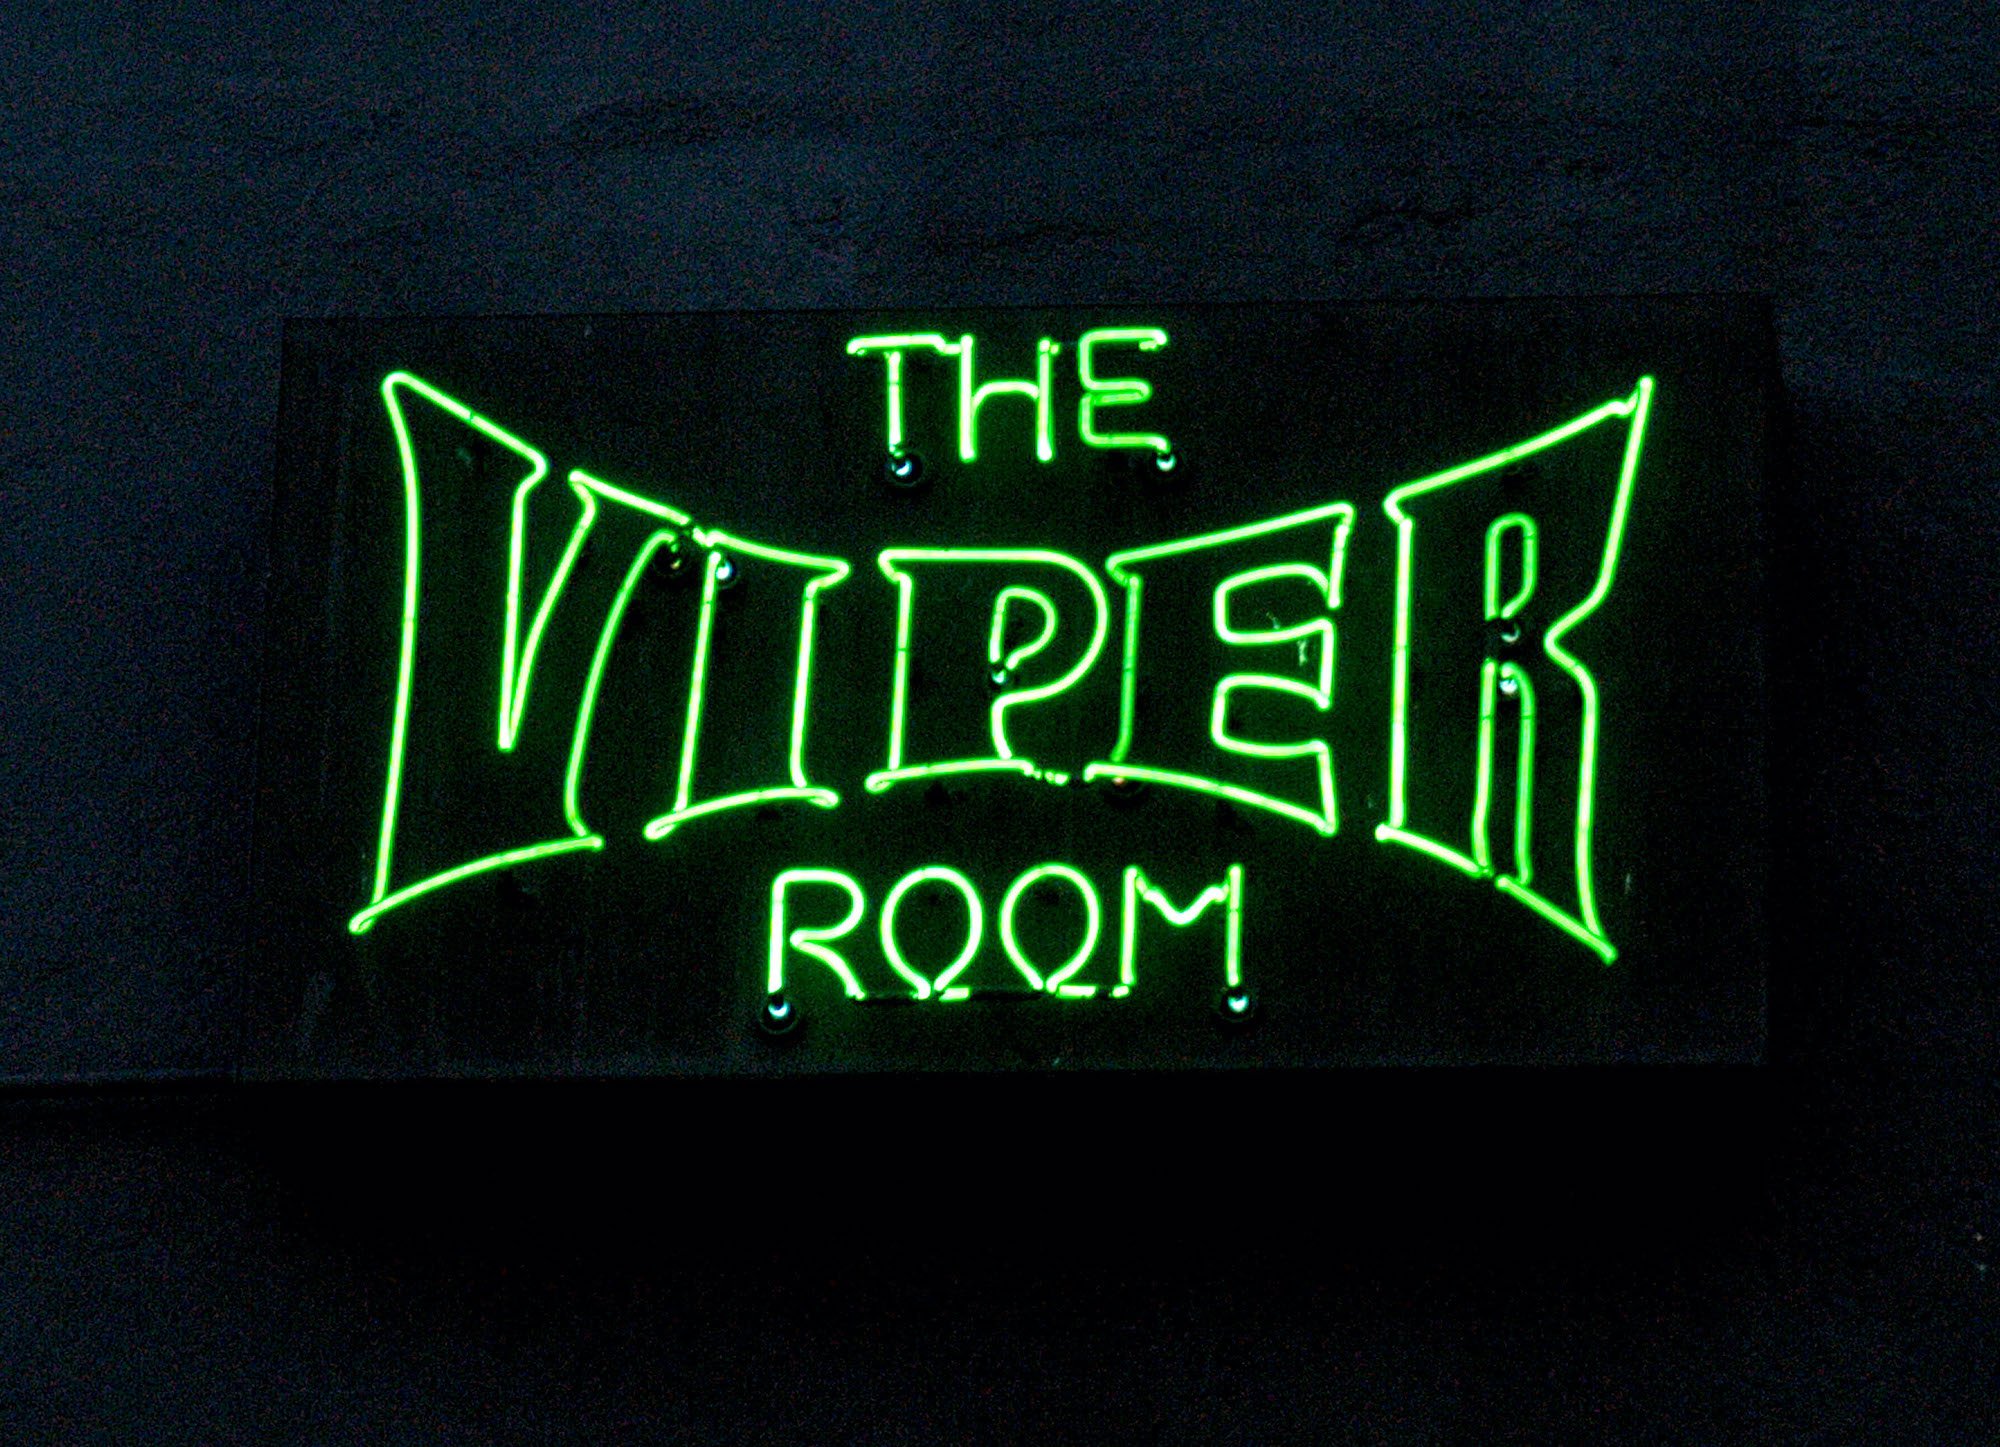 The Viper Room's green neon sign